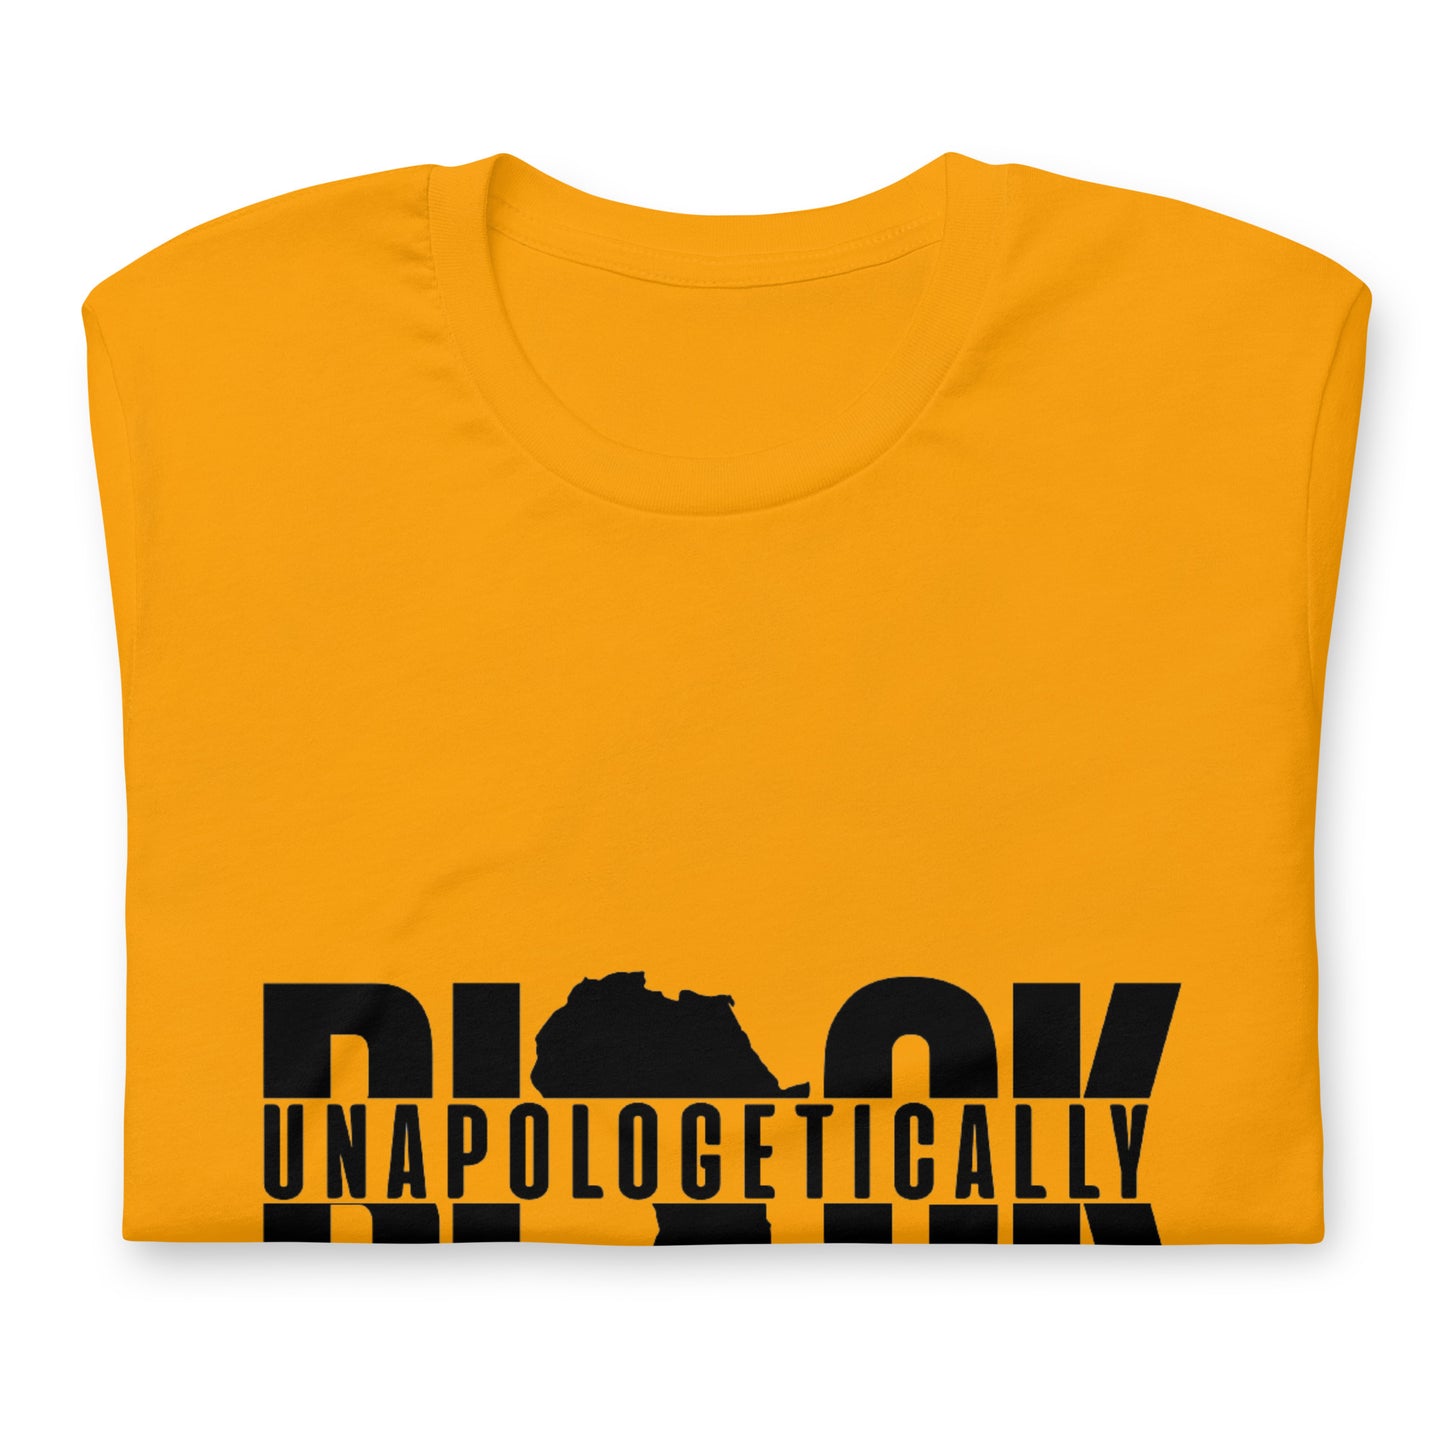 Sauce God Unapologetically Black T-shirt